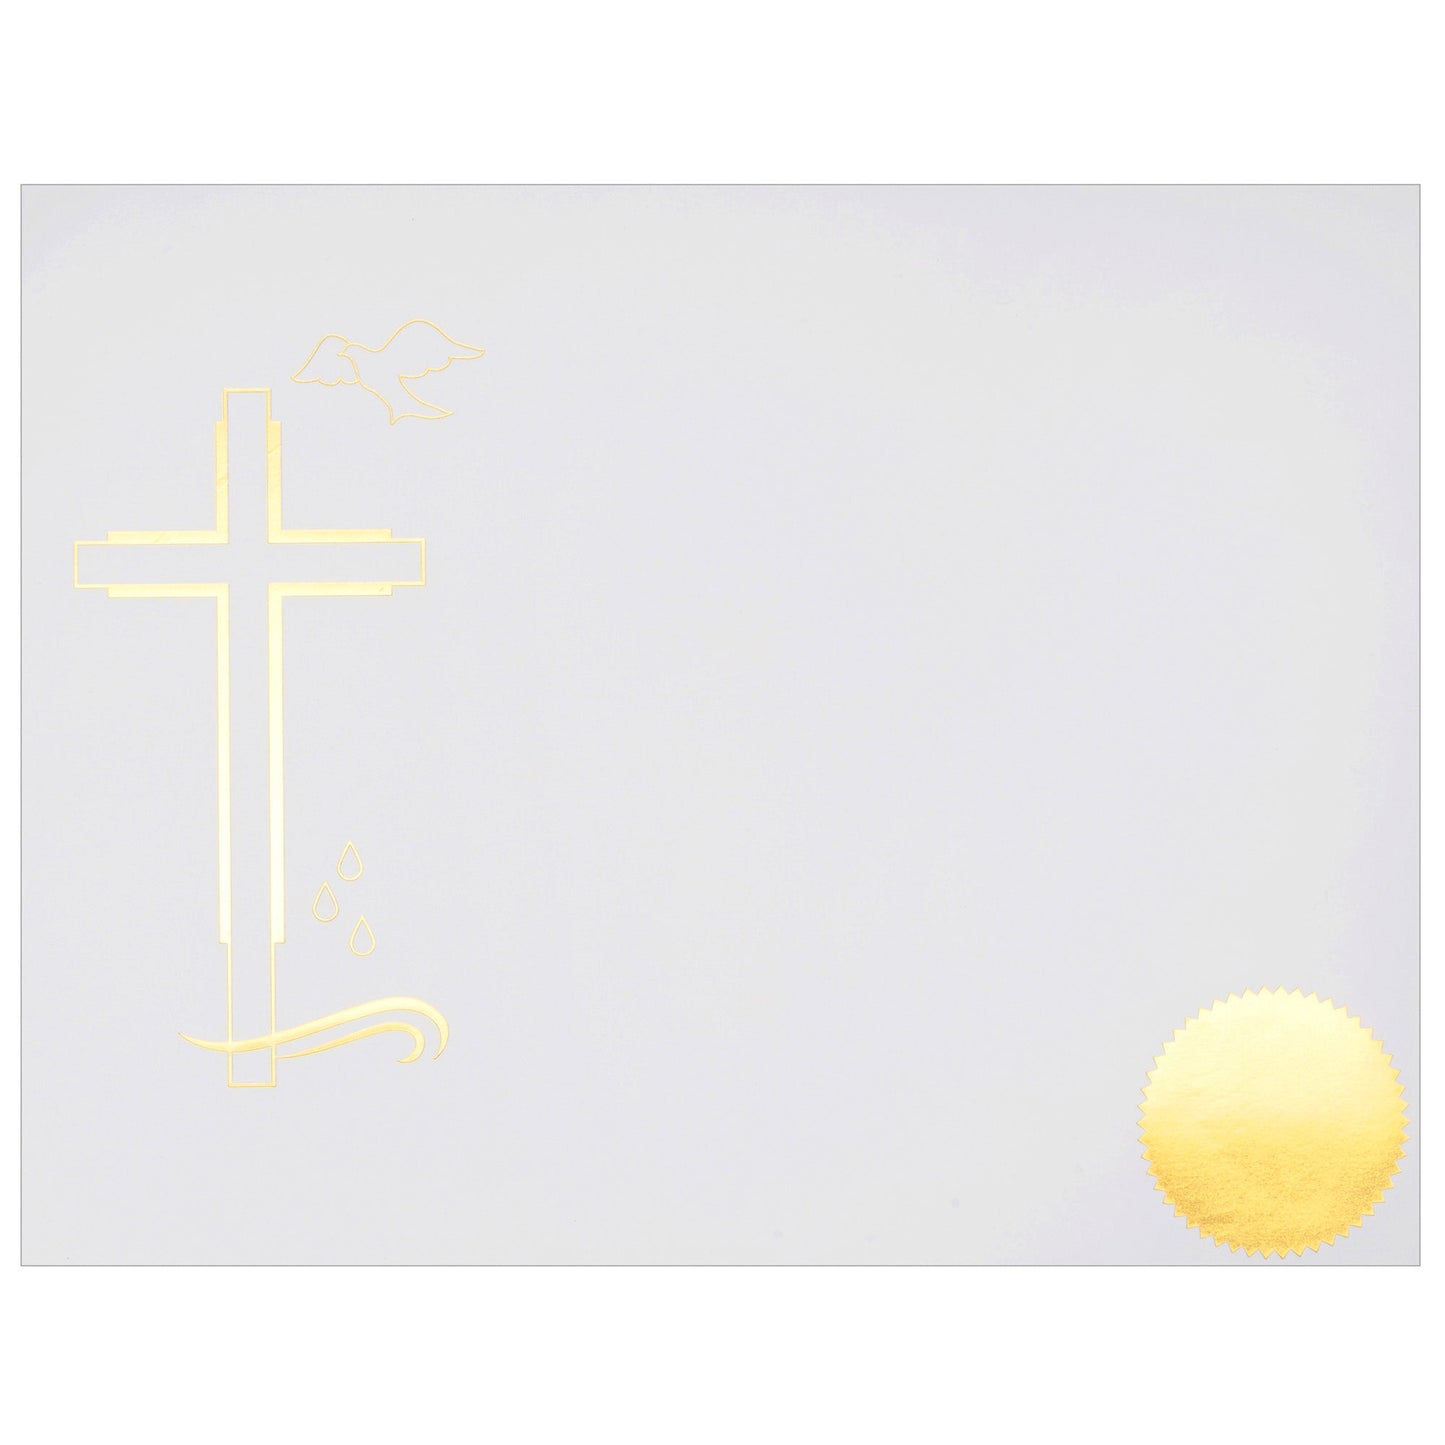 St. James® Religious Certificates - Baptism Certificates, 65 lb, Gold Foil, White Card Stock, Pack of 50